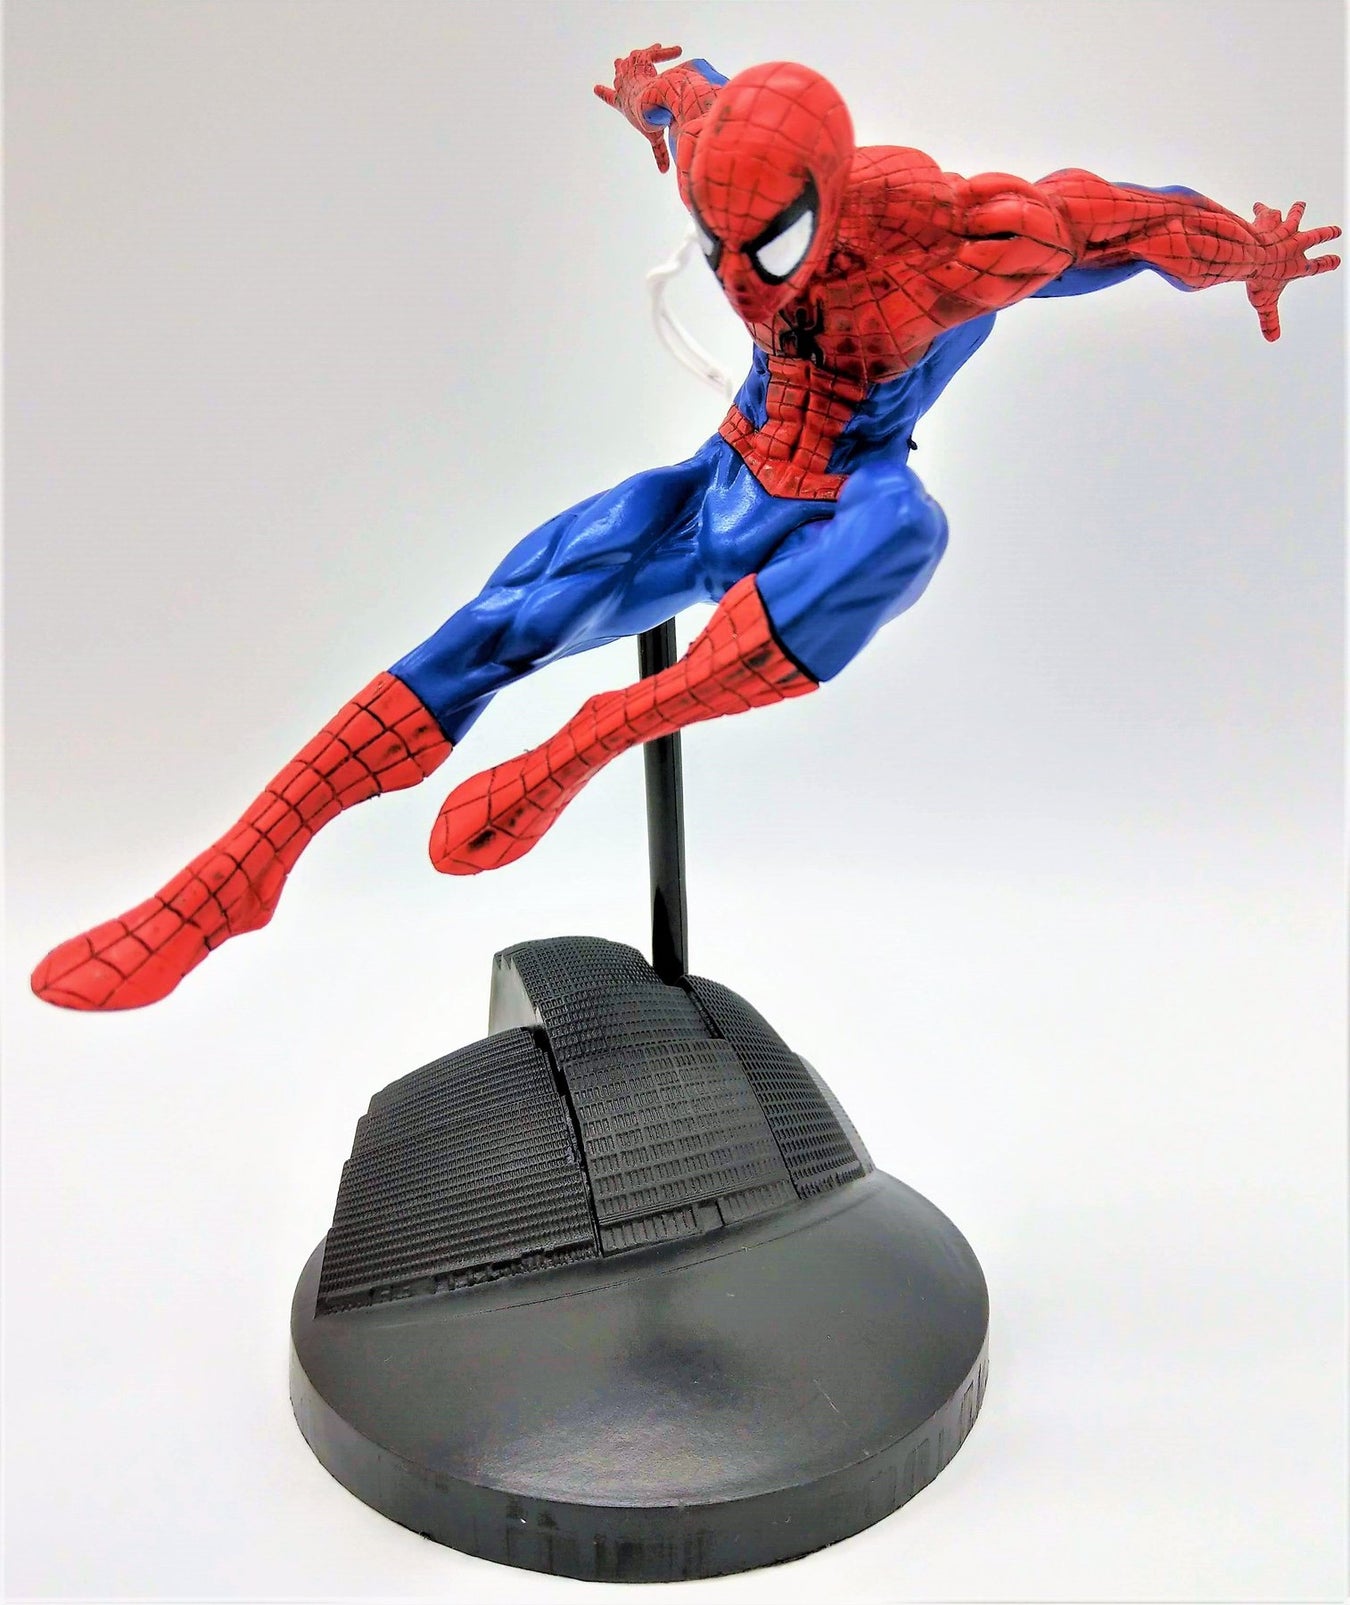 Spider-Man Action Figures at Prodigy Toys